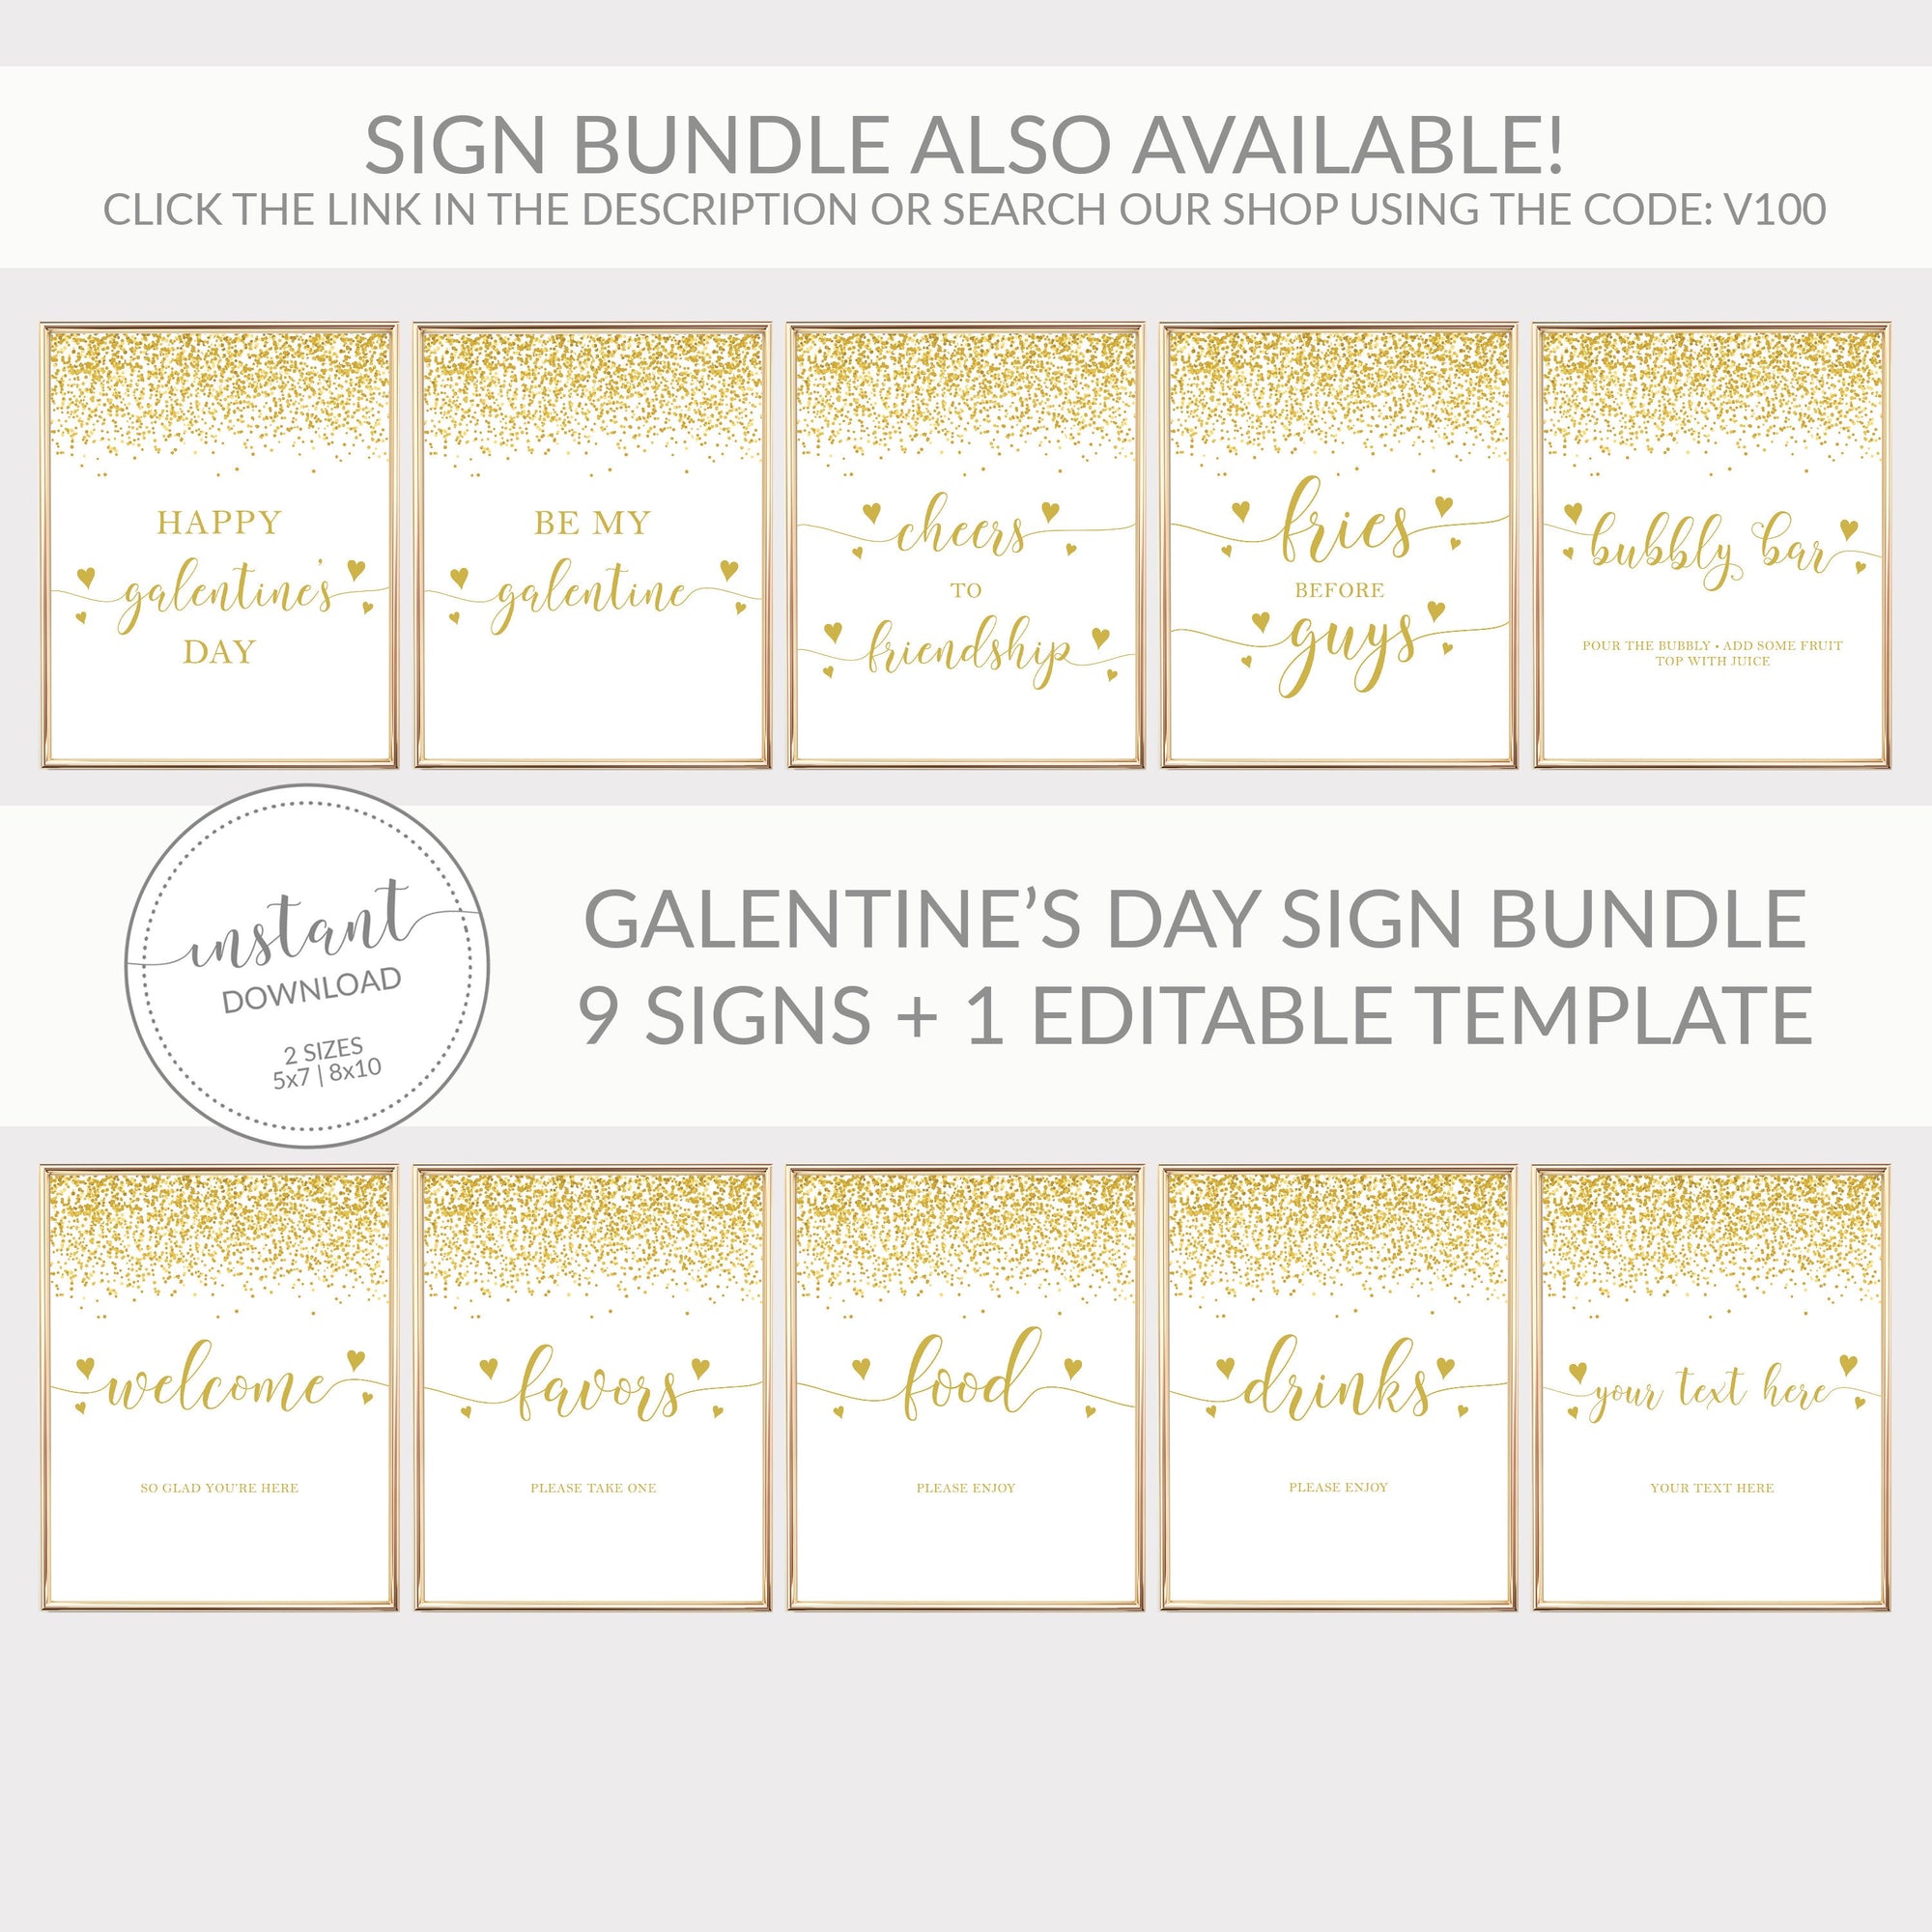 Galentines Day Party Welcome Sign Template, Printable Galentines Party Sign, Galentines Day Decorations, INSTANT DOWNLOAD - V100